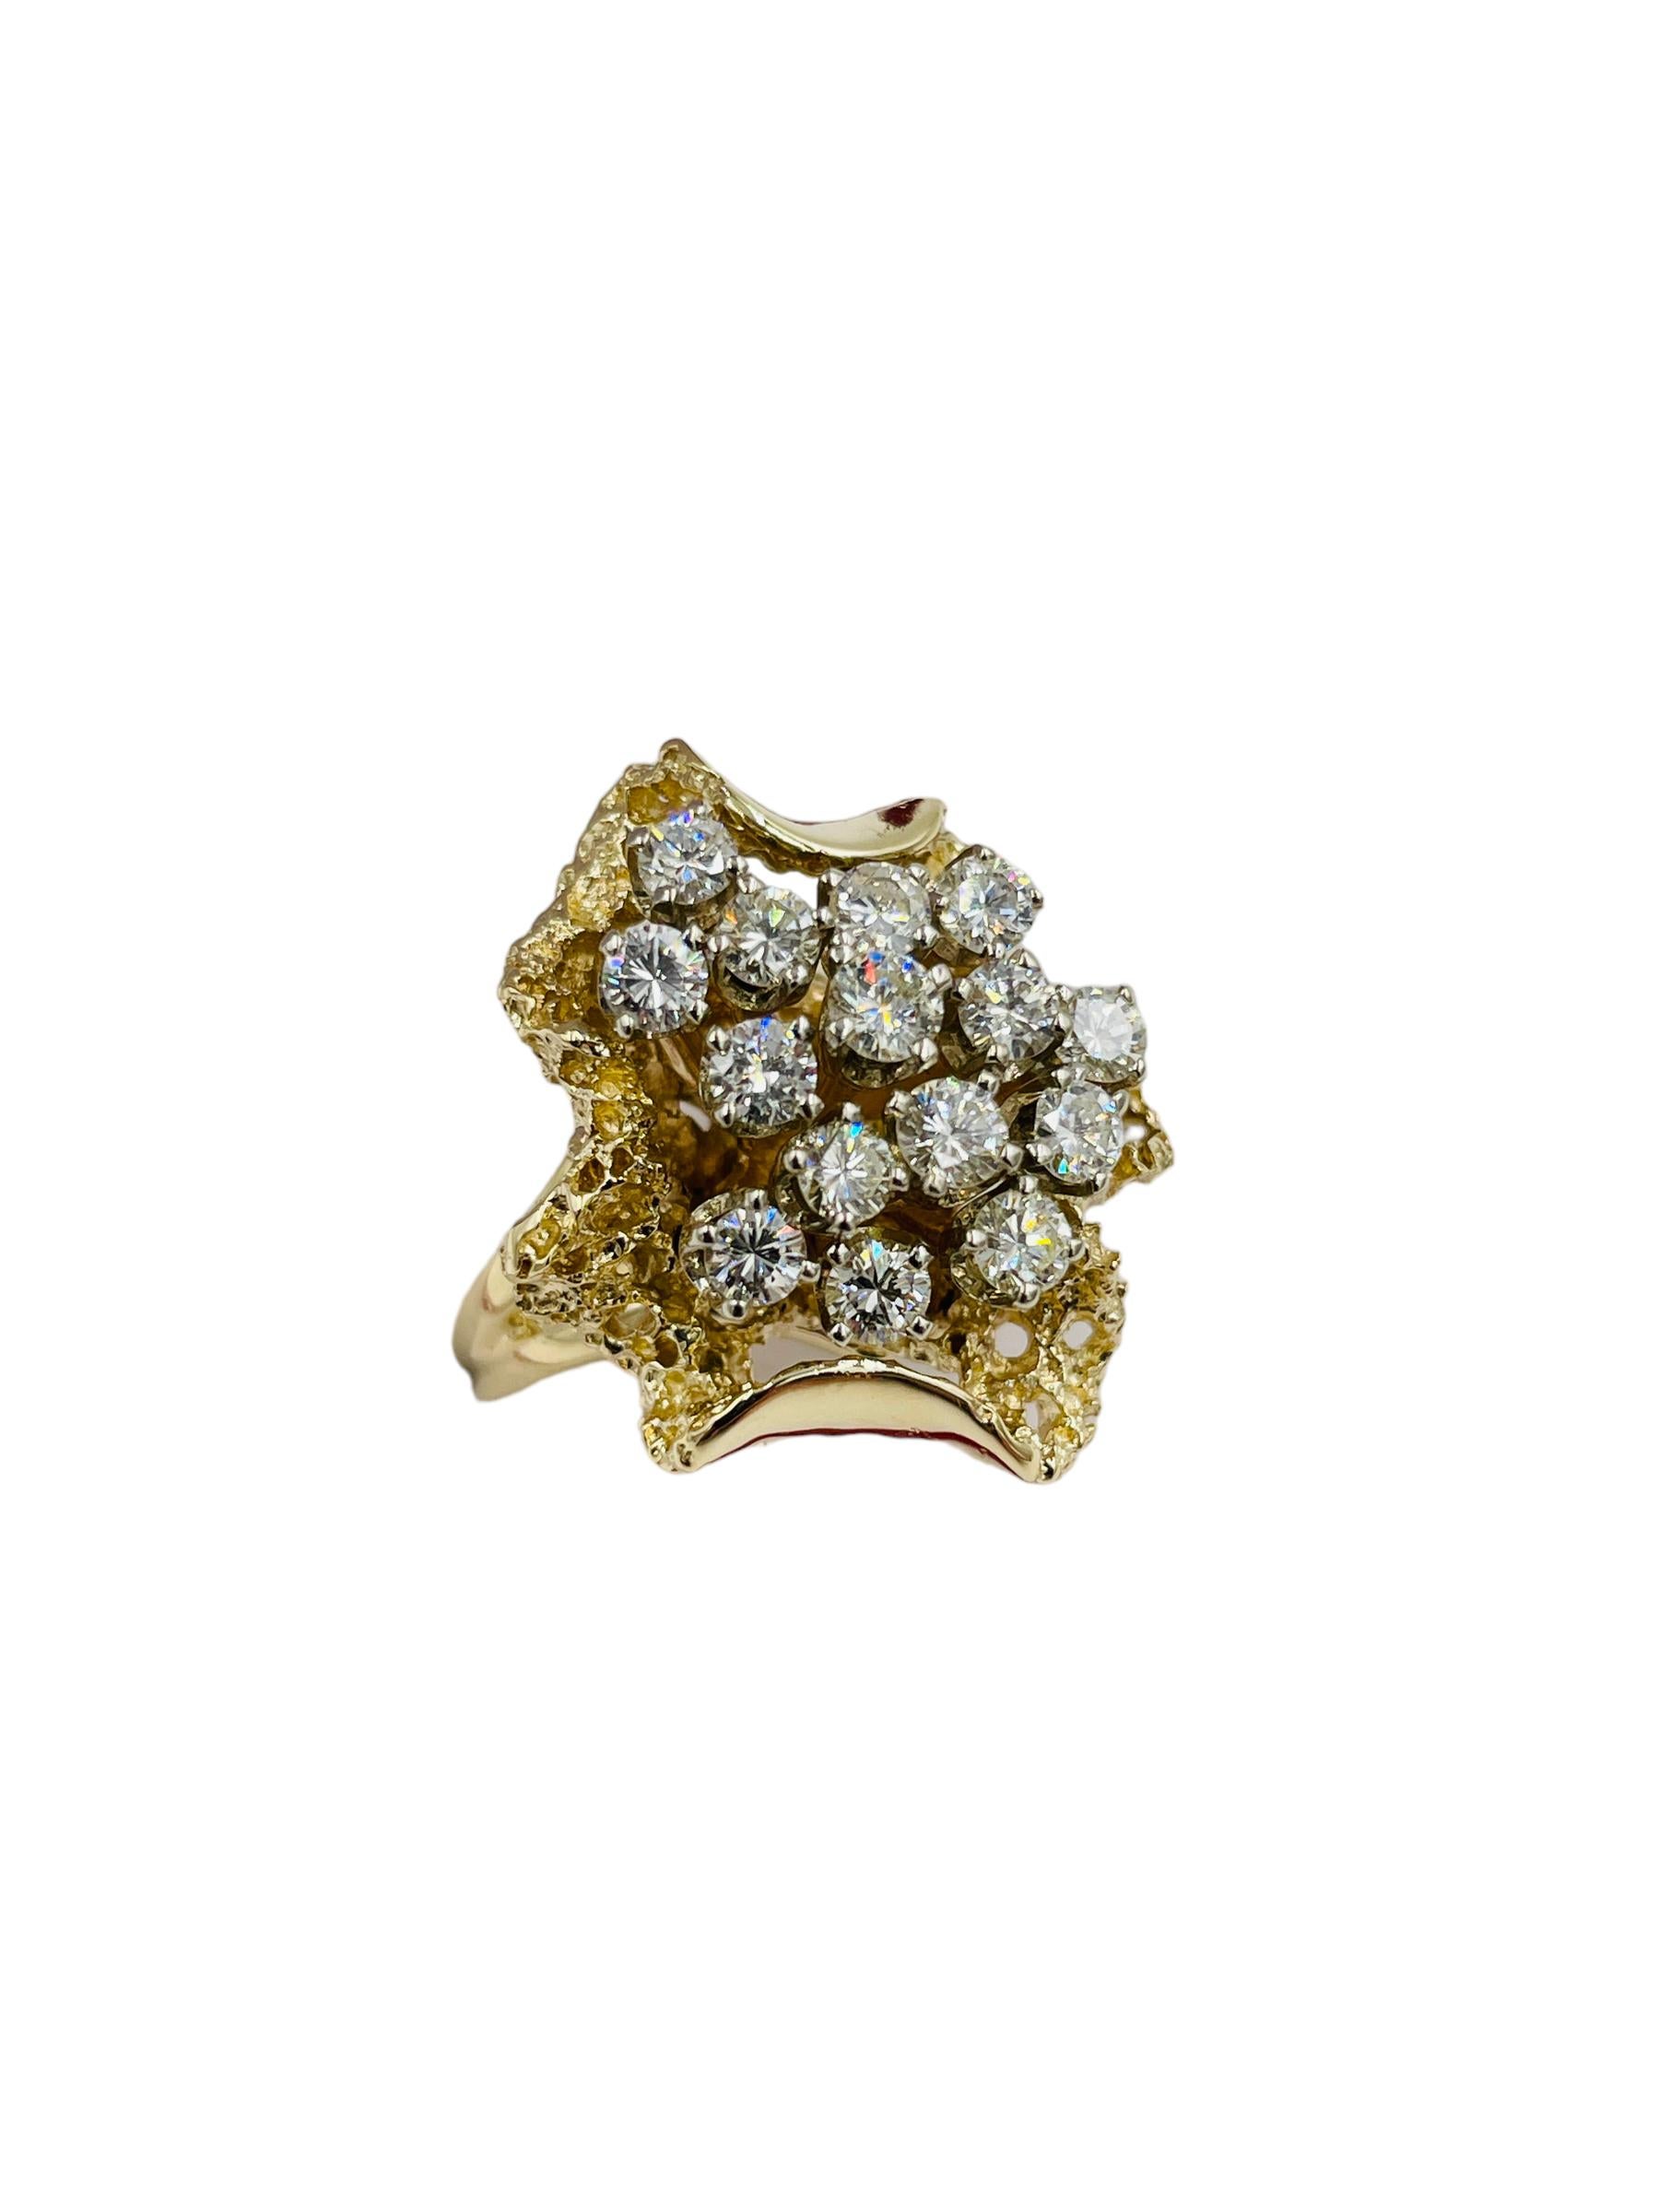 Diamond Yellow Gold Cluster Ring, circa 1970s.

ABOUT THIS ITEM:  R-DJ818A   From the fabulous 70s this unusually-designed diamond cluster ring, is very unique and very well made.  The fifteen diamonds clustered together are nestled in an abstract